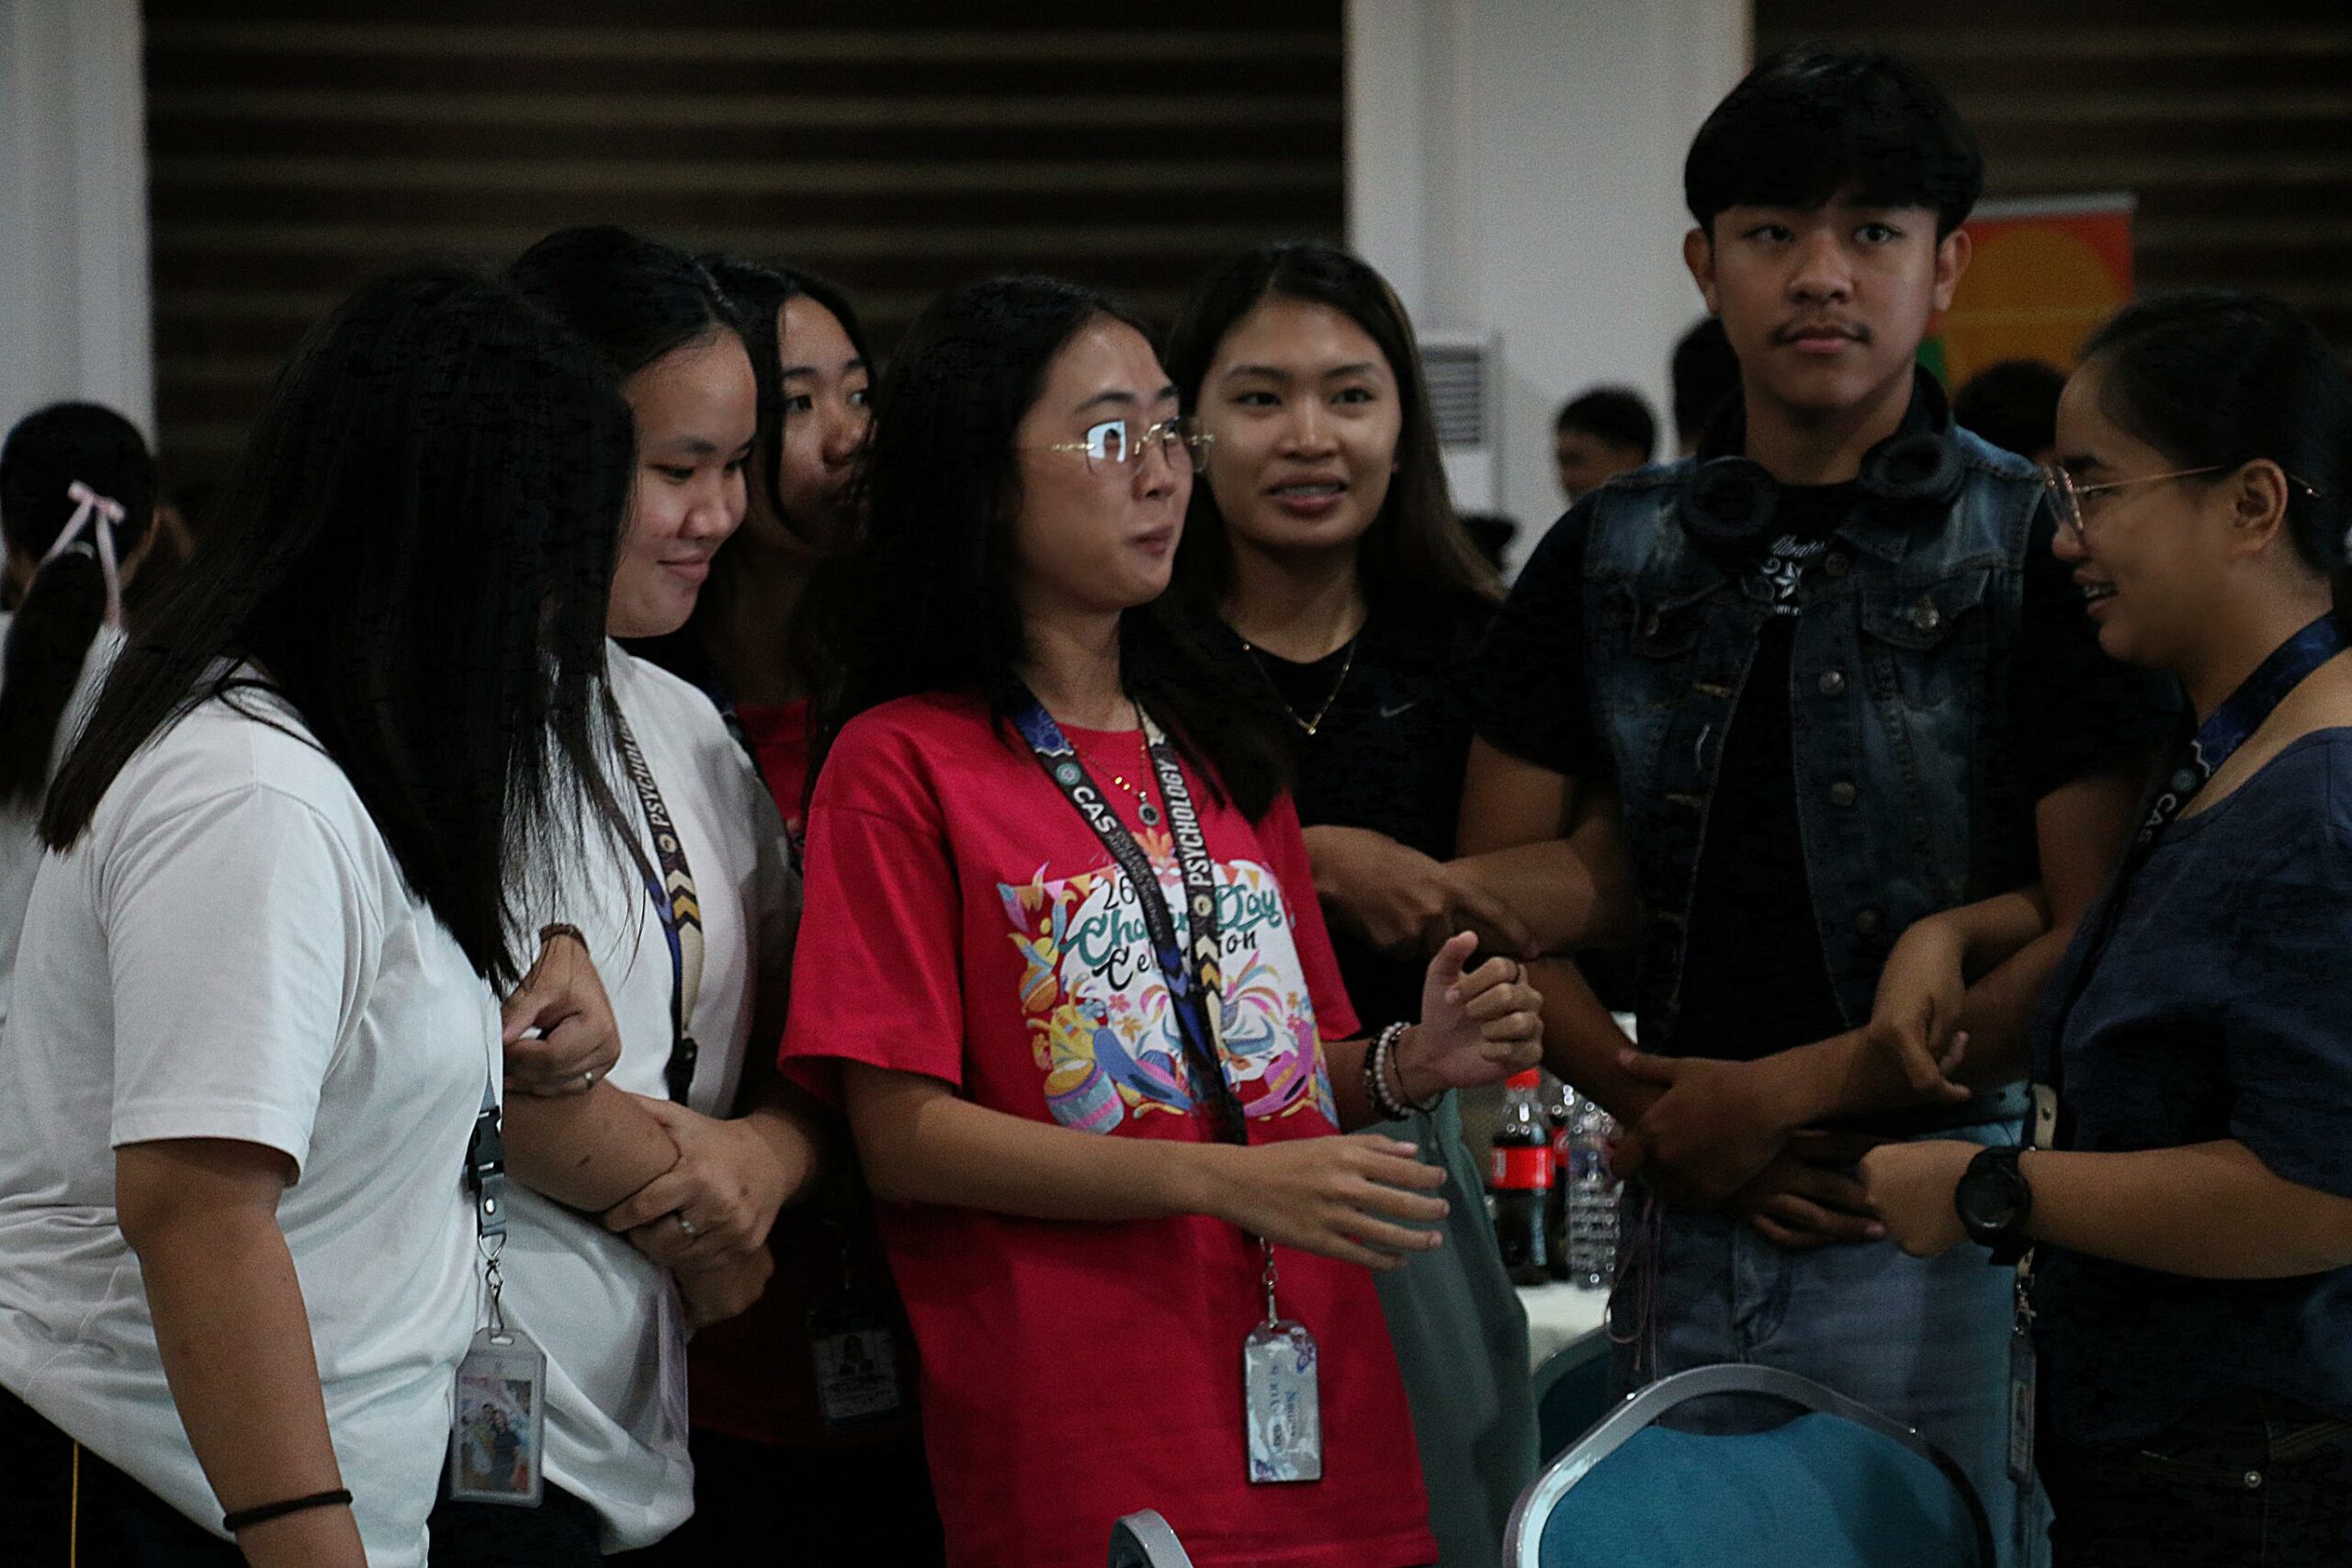 PLDT, Smart empower youth at Nueva Ecija University of Science and Technology through mental health awareness initiative